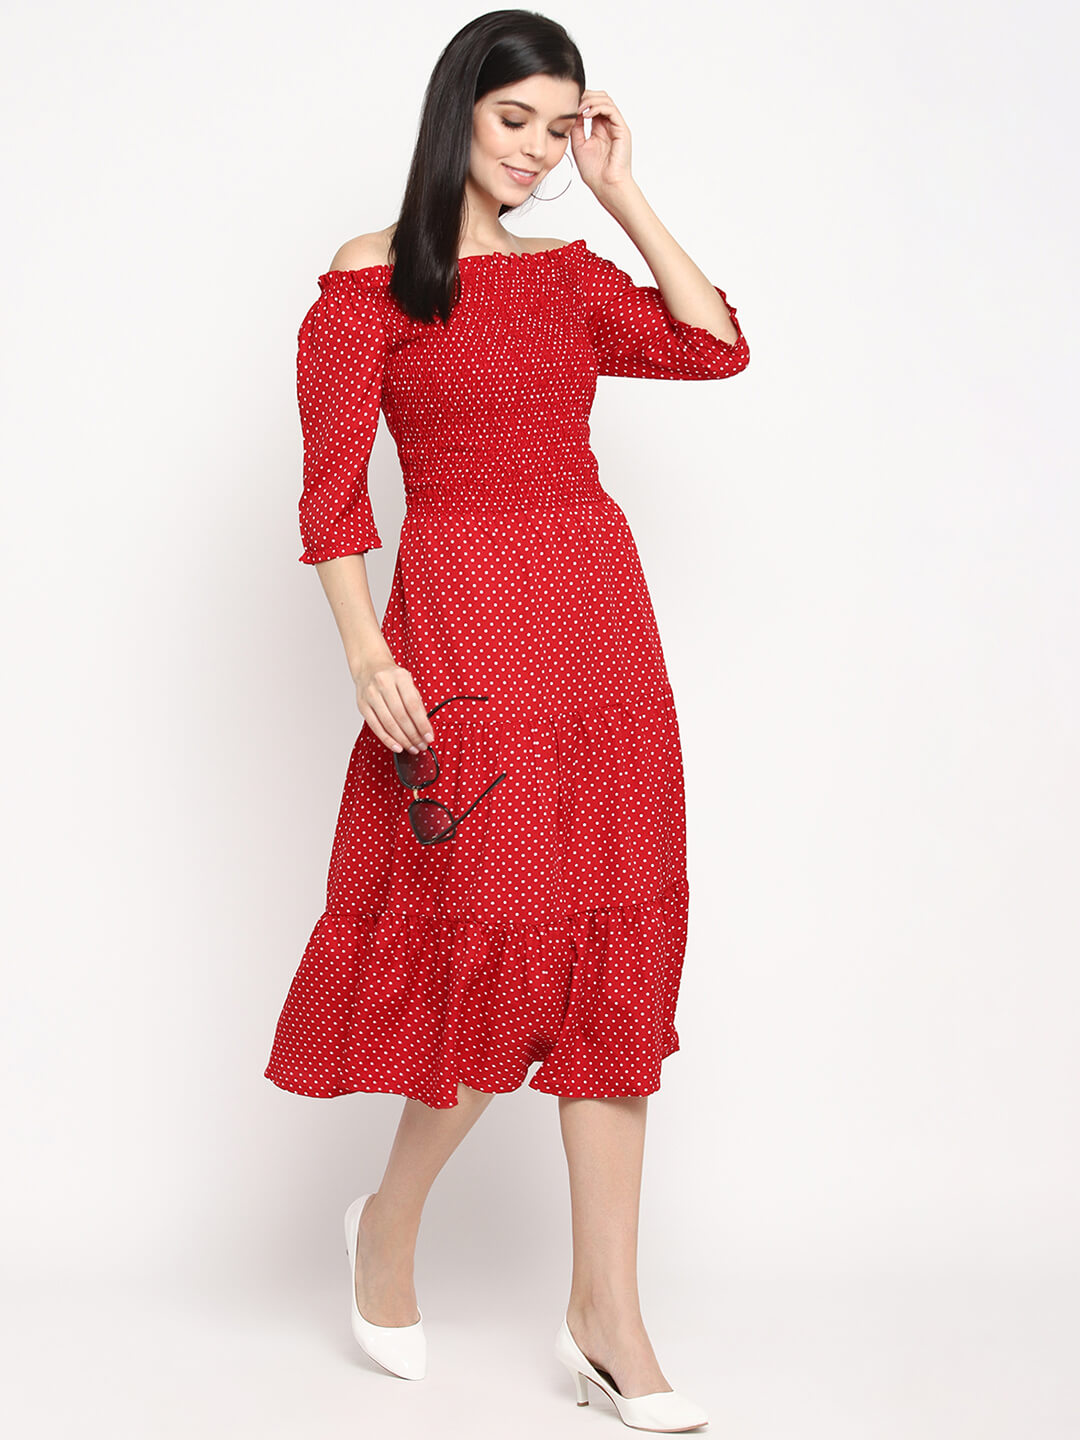 Msfq Red And White Polka Dot Off Shoulder Dress